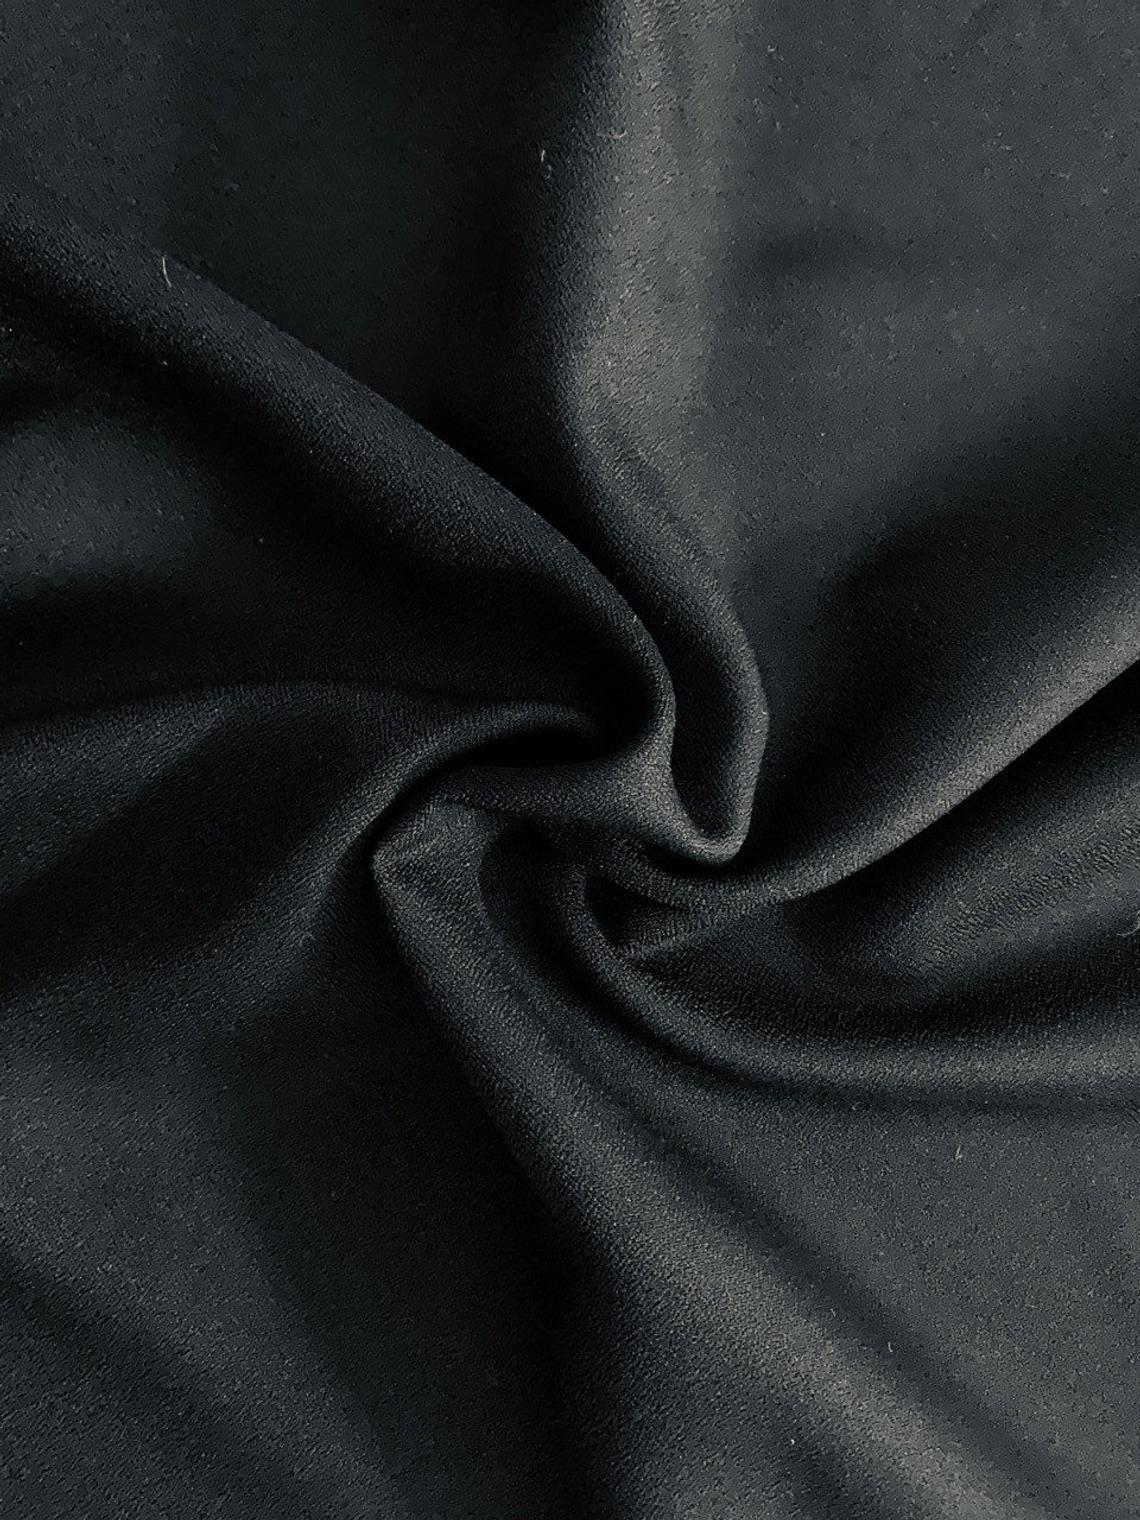 Black Crepe Fabric - 60" by the yard (100% polyester)